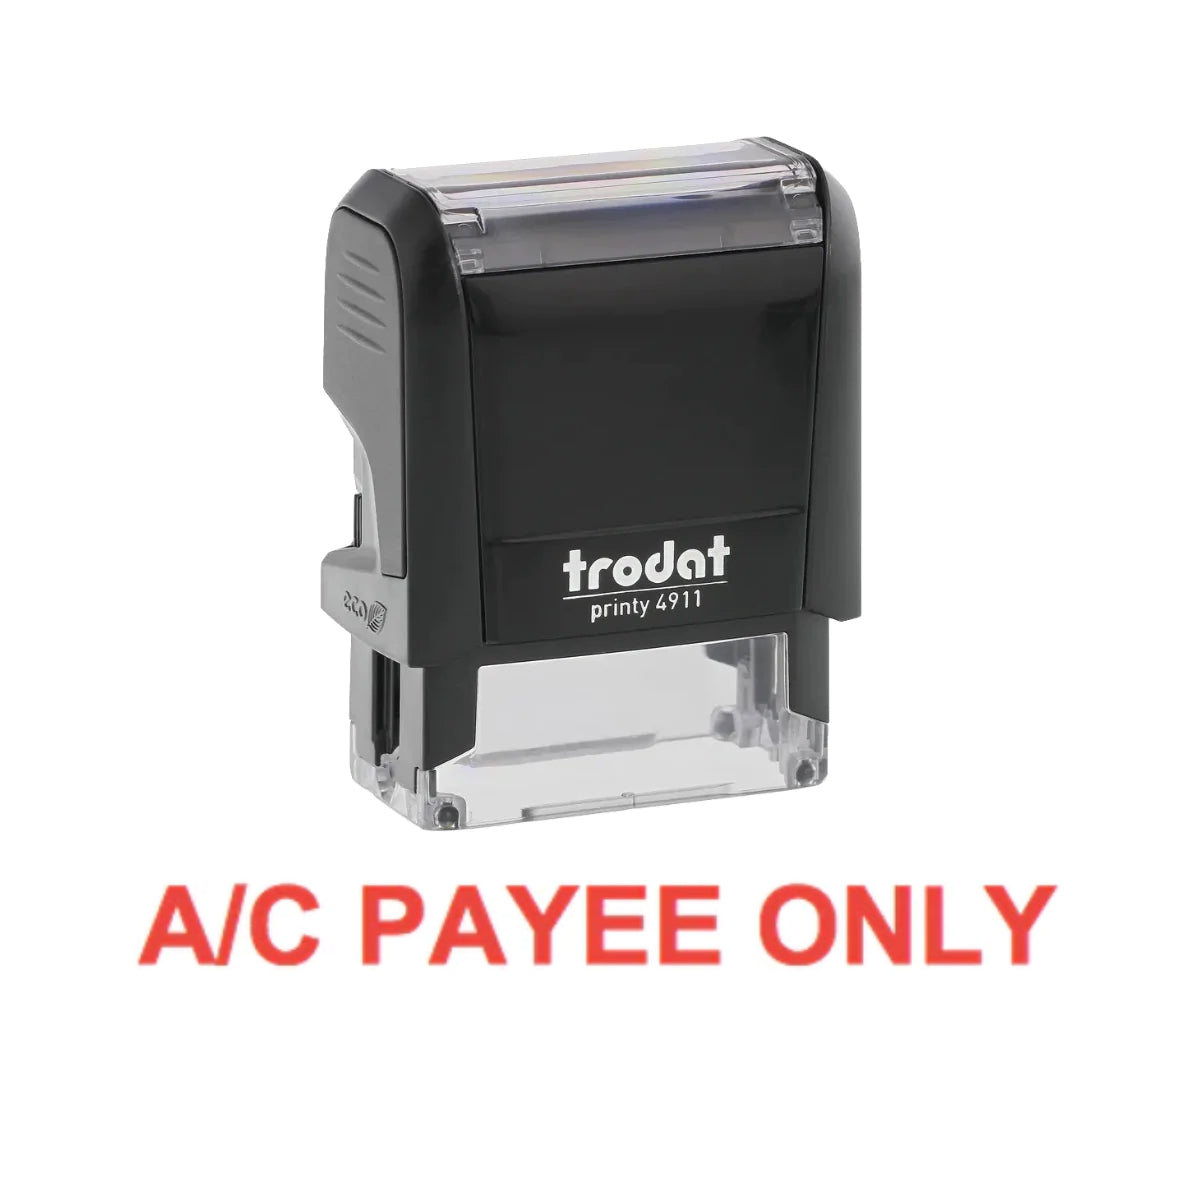 Trodat Printy 4911 Stamp 'A/C PAYEE ONLY'